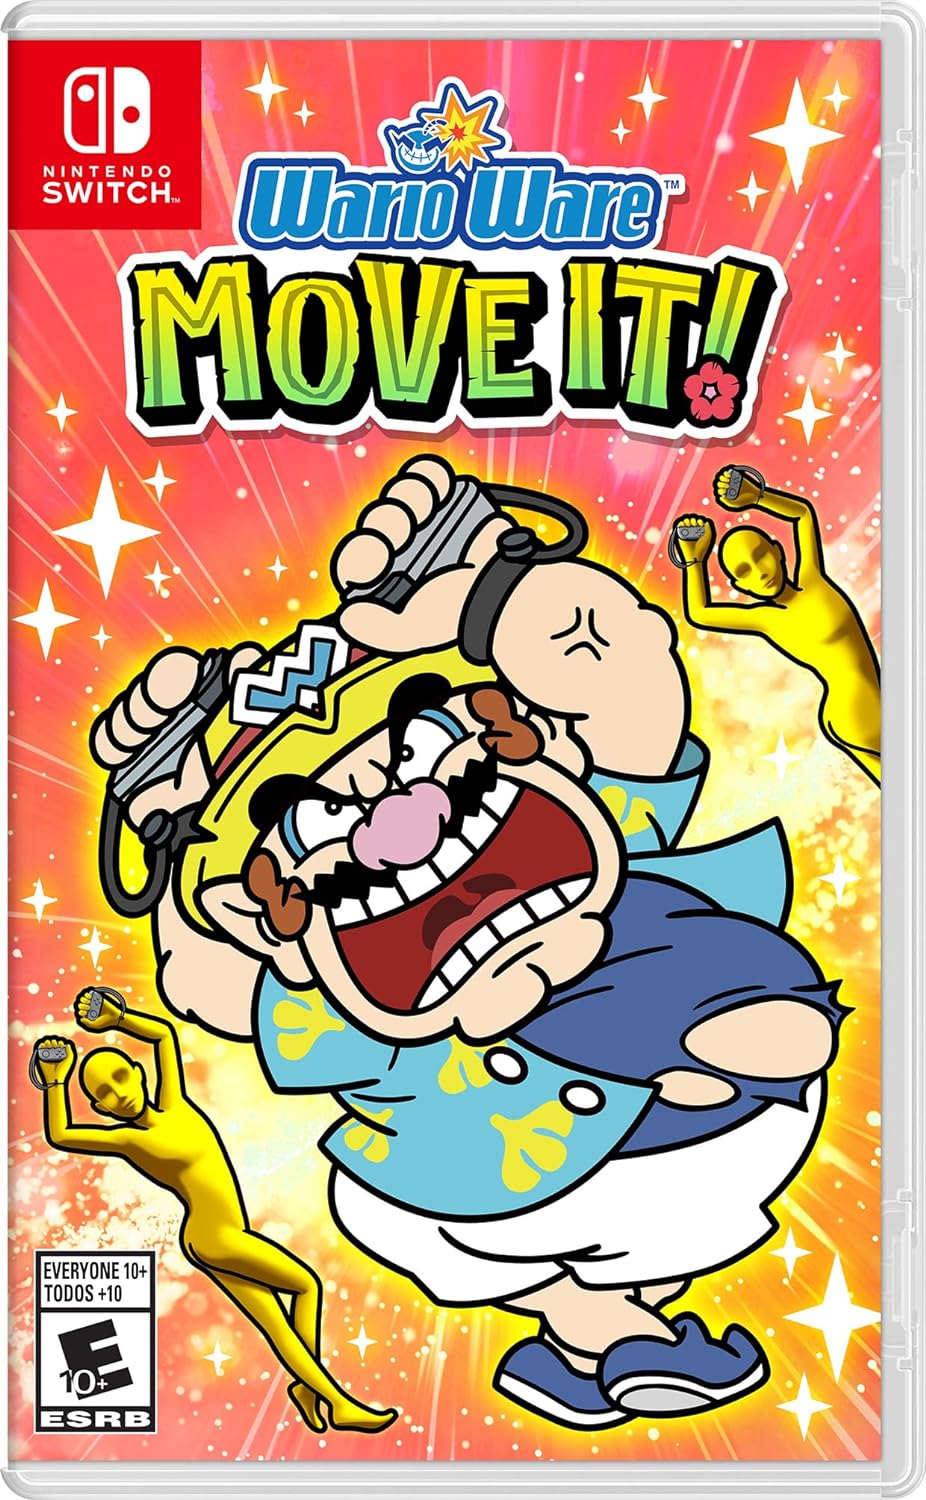 WarioWare: Move It! (Nintendo Switch) $30 + Free Shipping w/ Prime or $35+